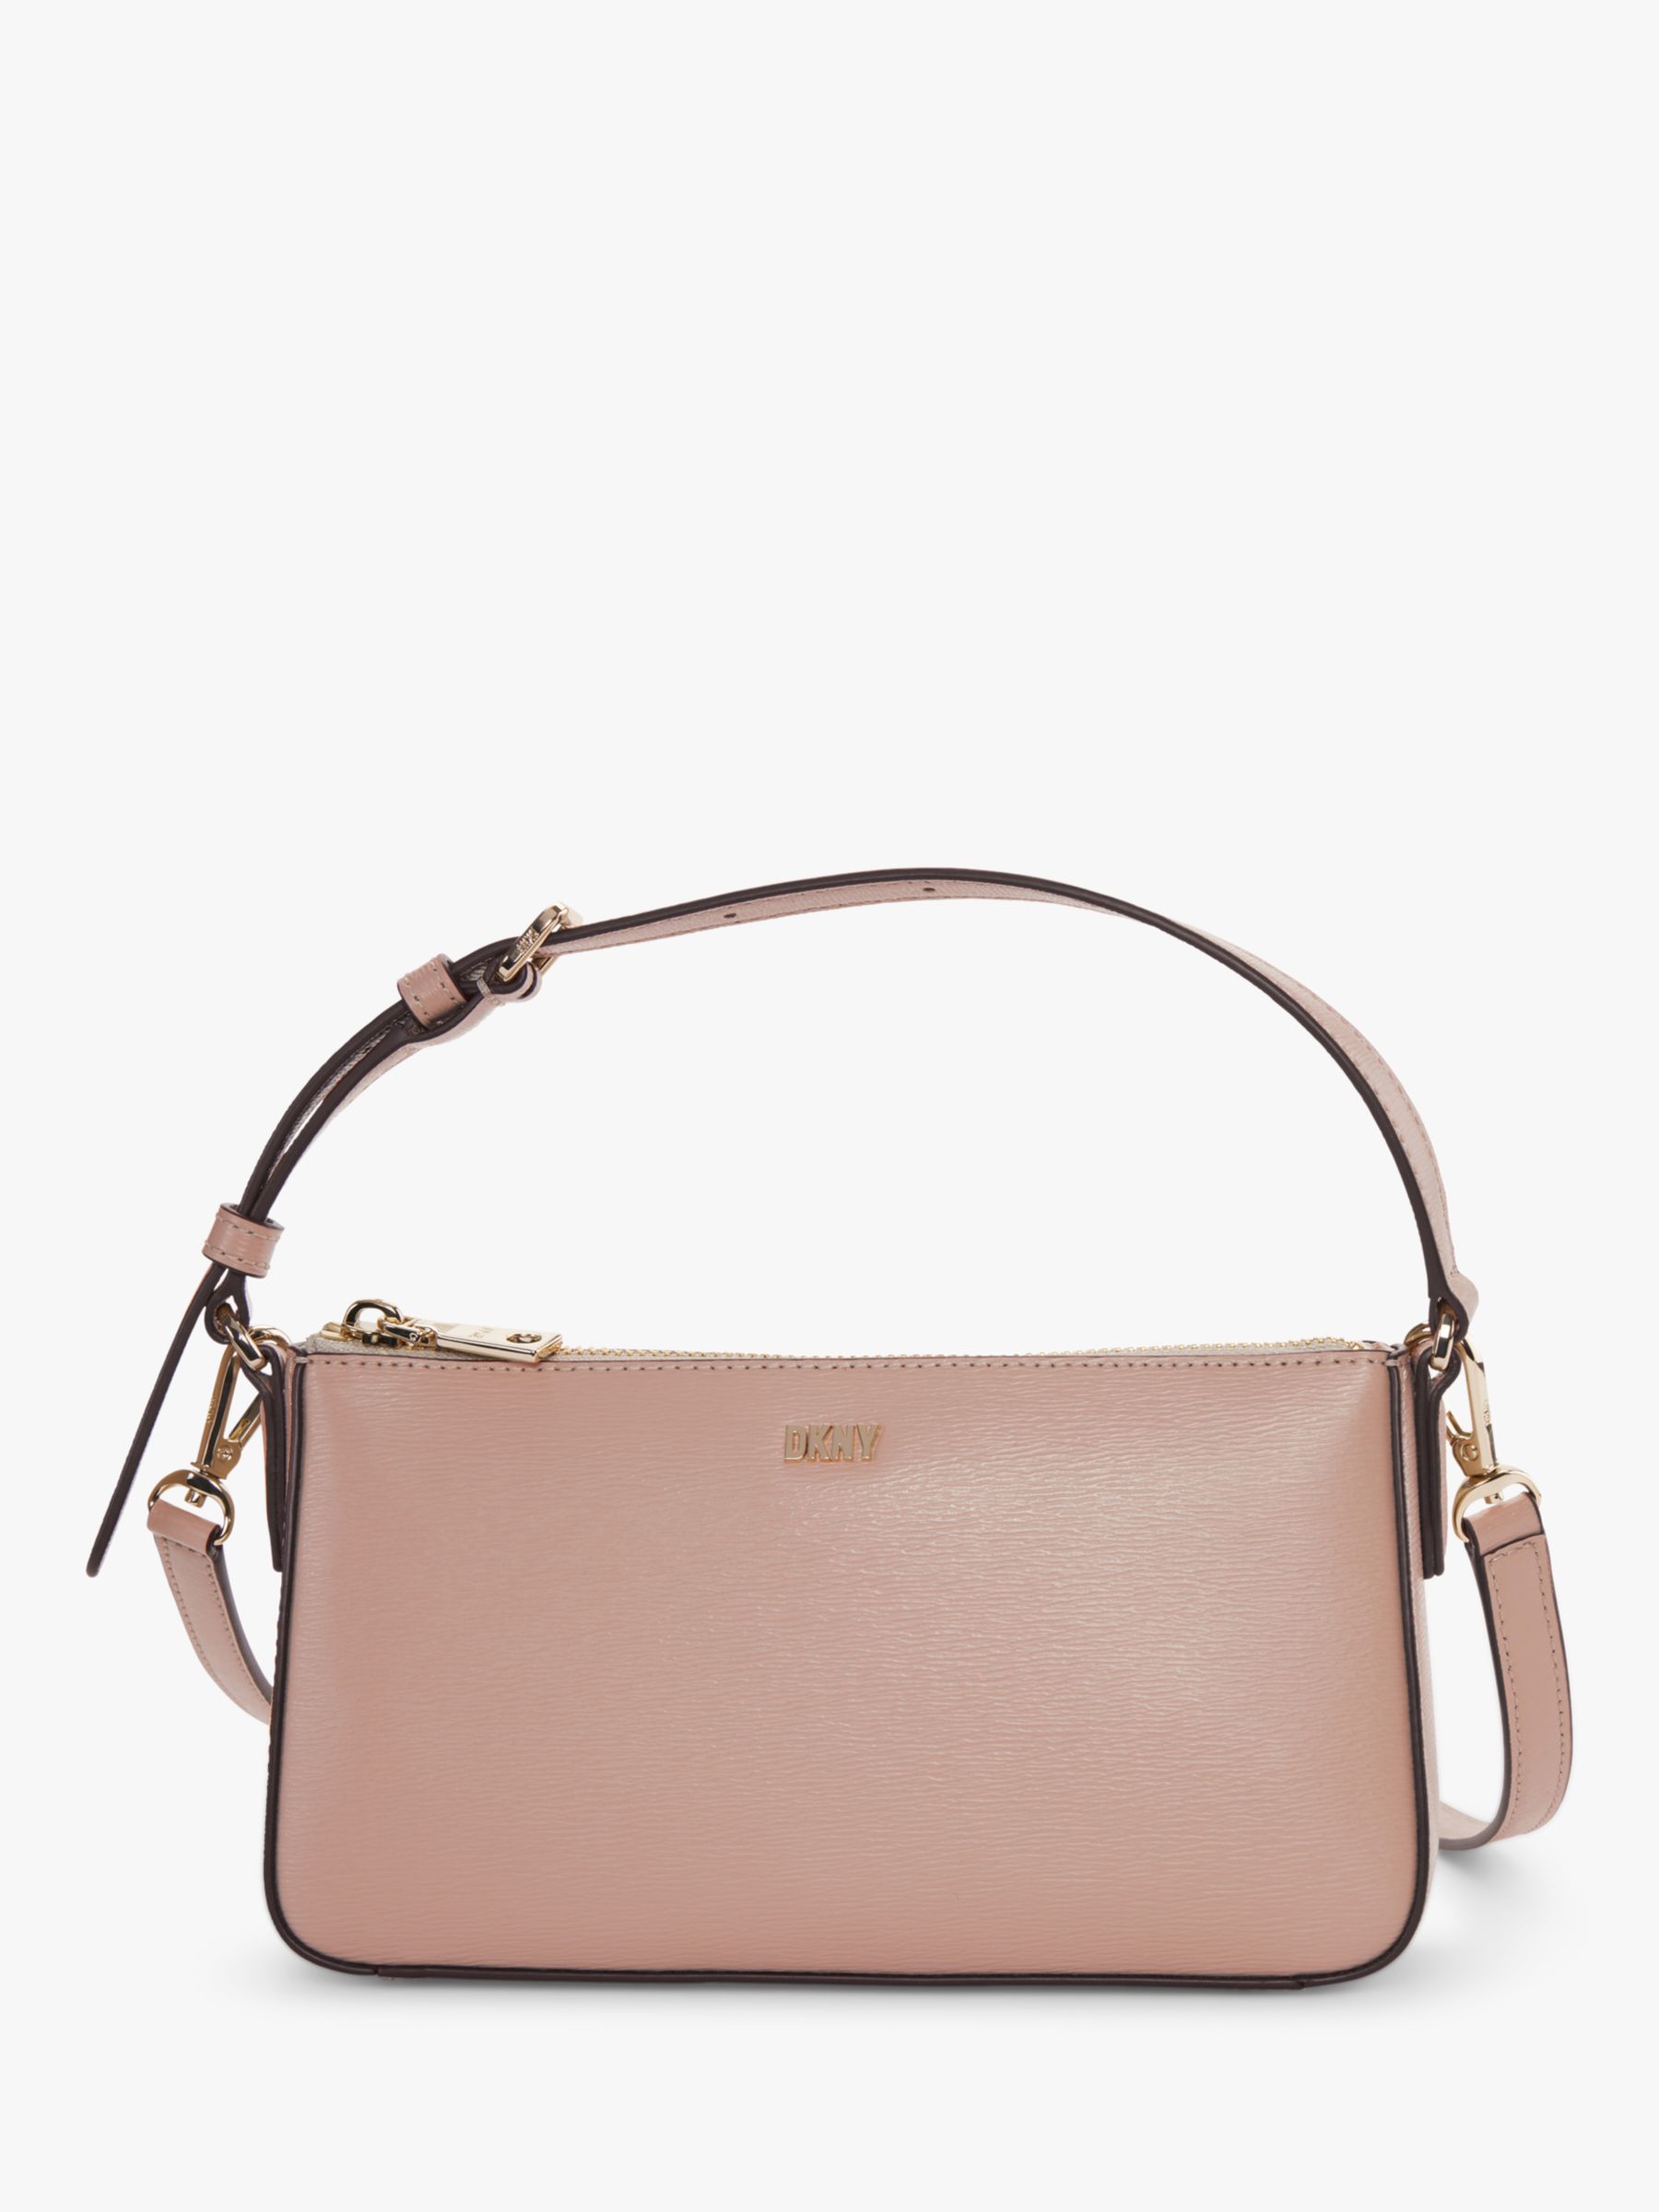 DKNY Bryant Leather Cross Body Bag, Cameo at John Lewis & Partners